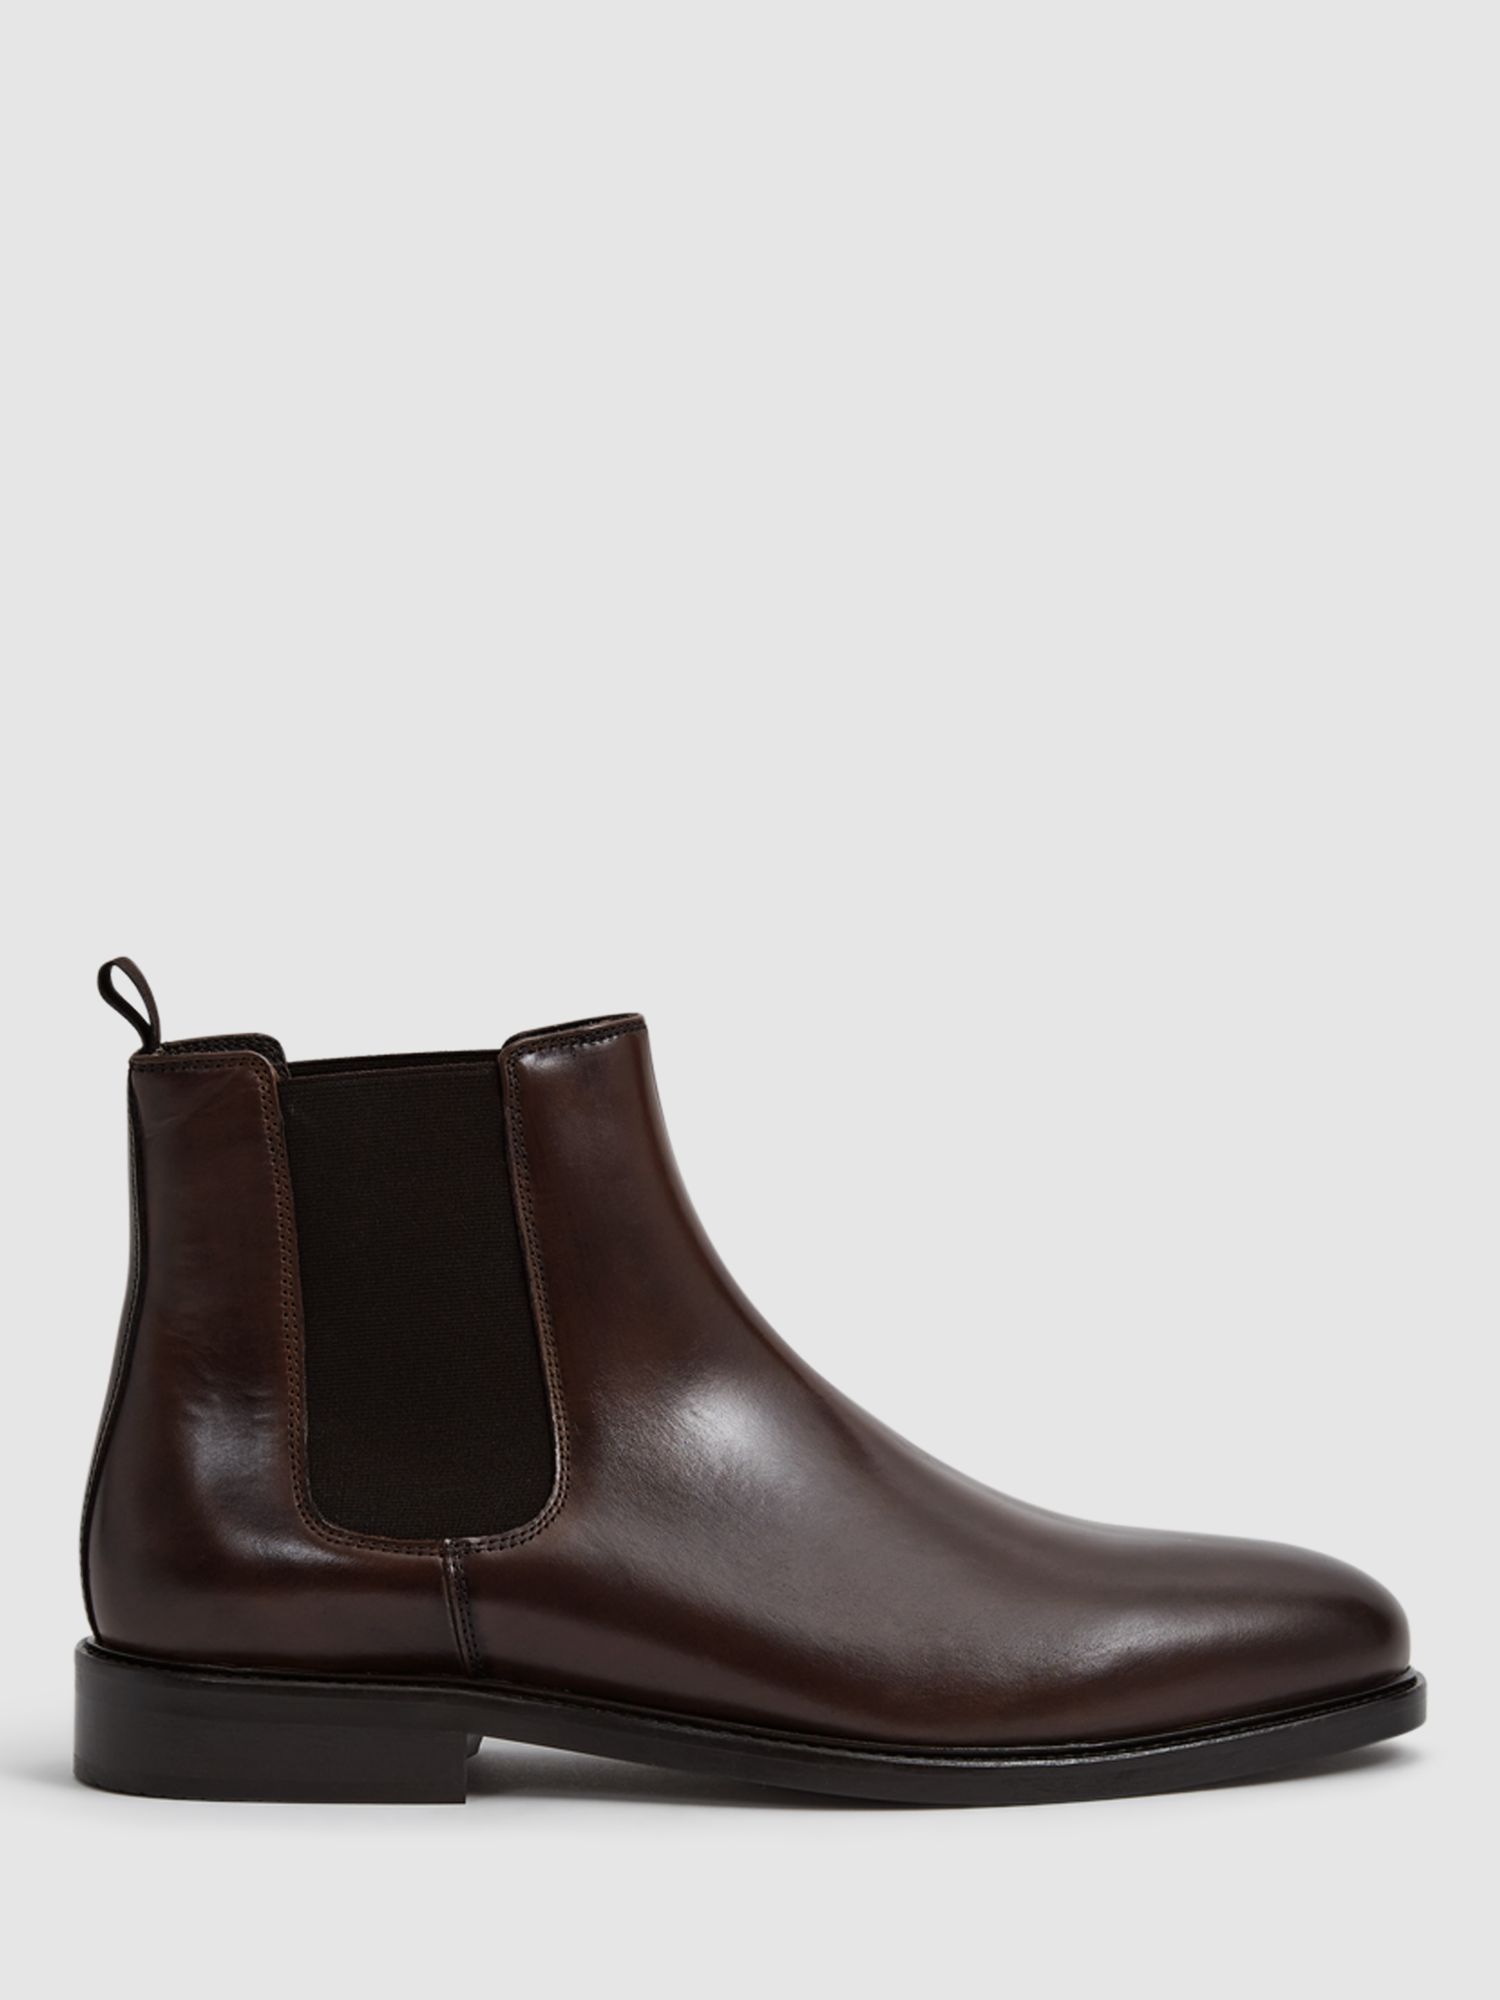 Reiss Tenor Leather Chelsea Boots, Brown at John Lewis & Partners